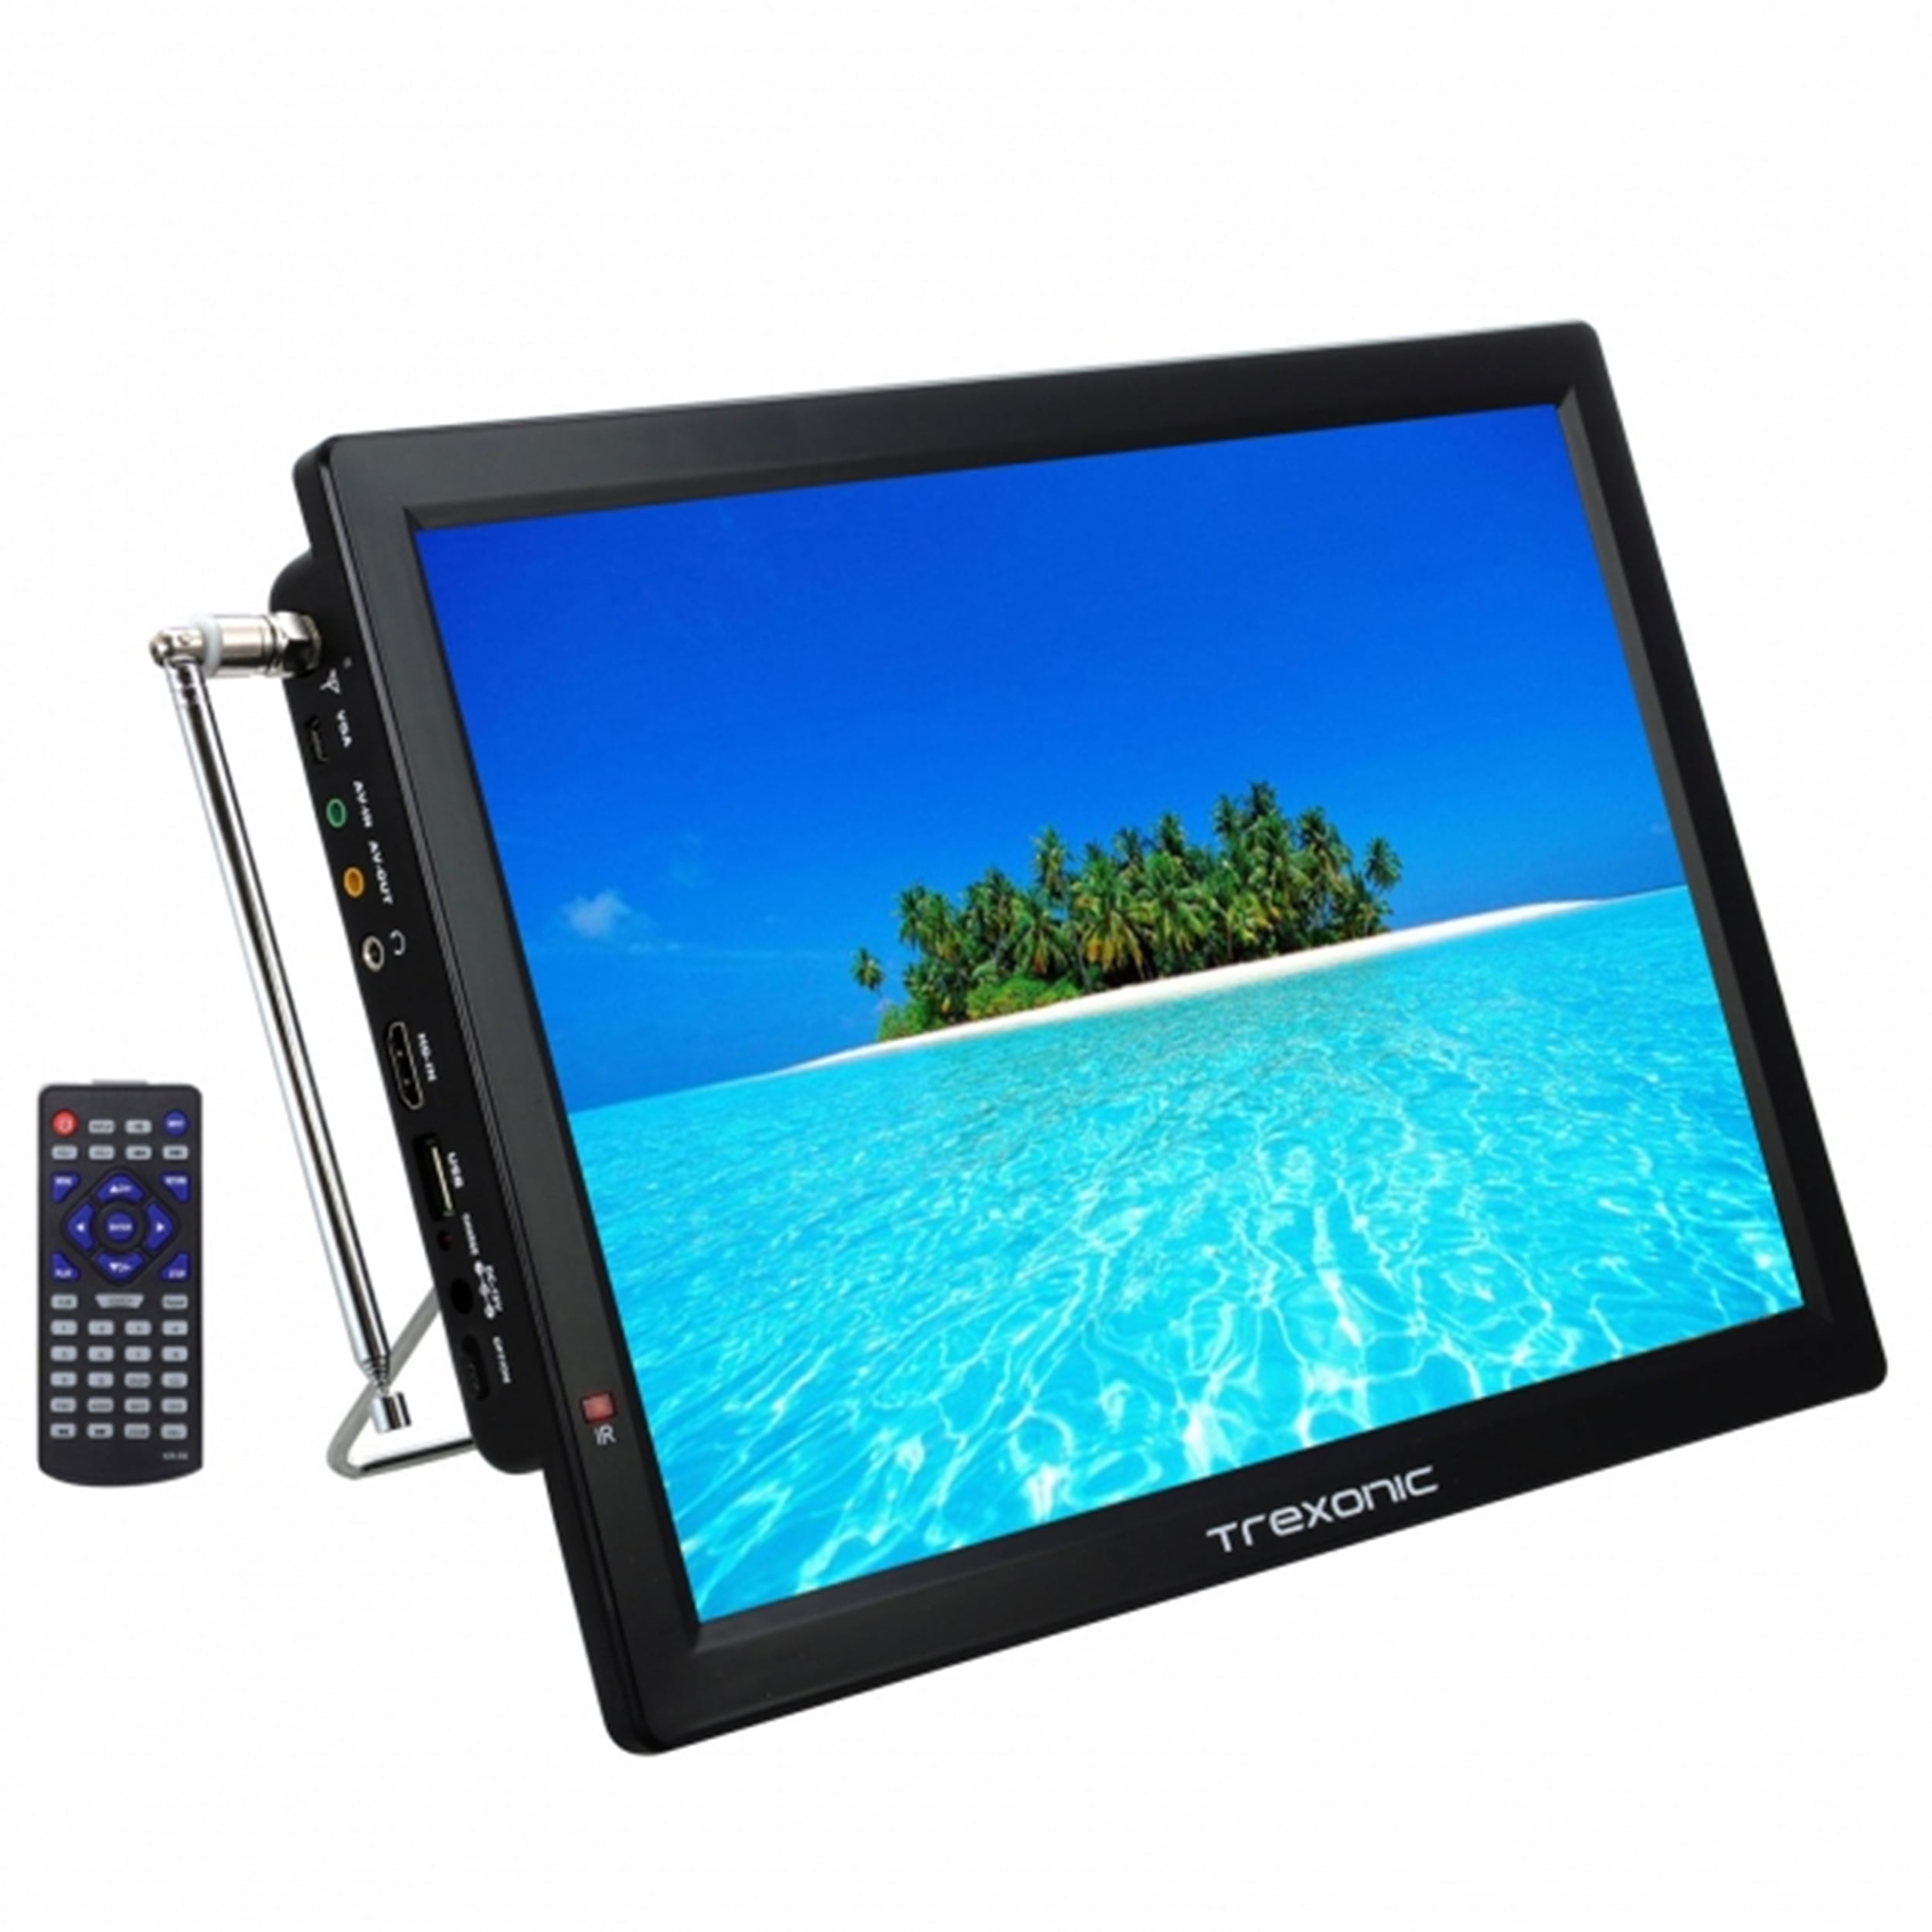  16 Inch Portable LED TV, 1080p ATSC Digital TV, Widescreen HDMI  USB Digital Tuner, AV Input/Output, Display Monitor, Analog TV, ATV with  Stand, Remote Controller : Electronics